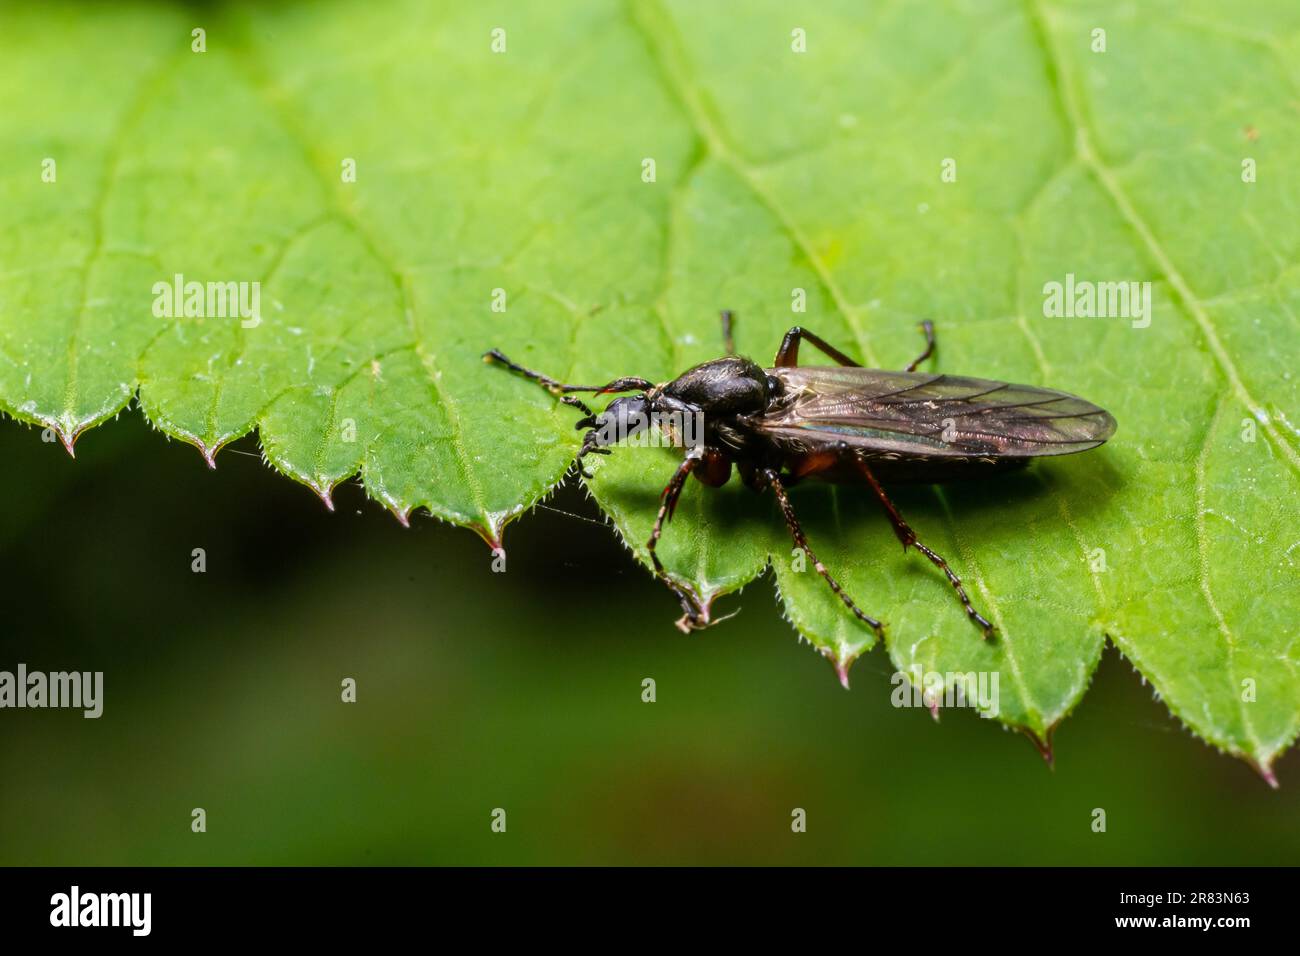 Bibio marci is a fly from the family Bibionidae called March flies and lovebugs. Larvae of this insects live in soil and damaged plant roots. Stock Photo